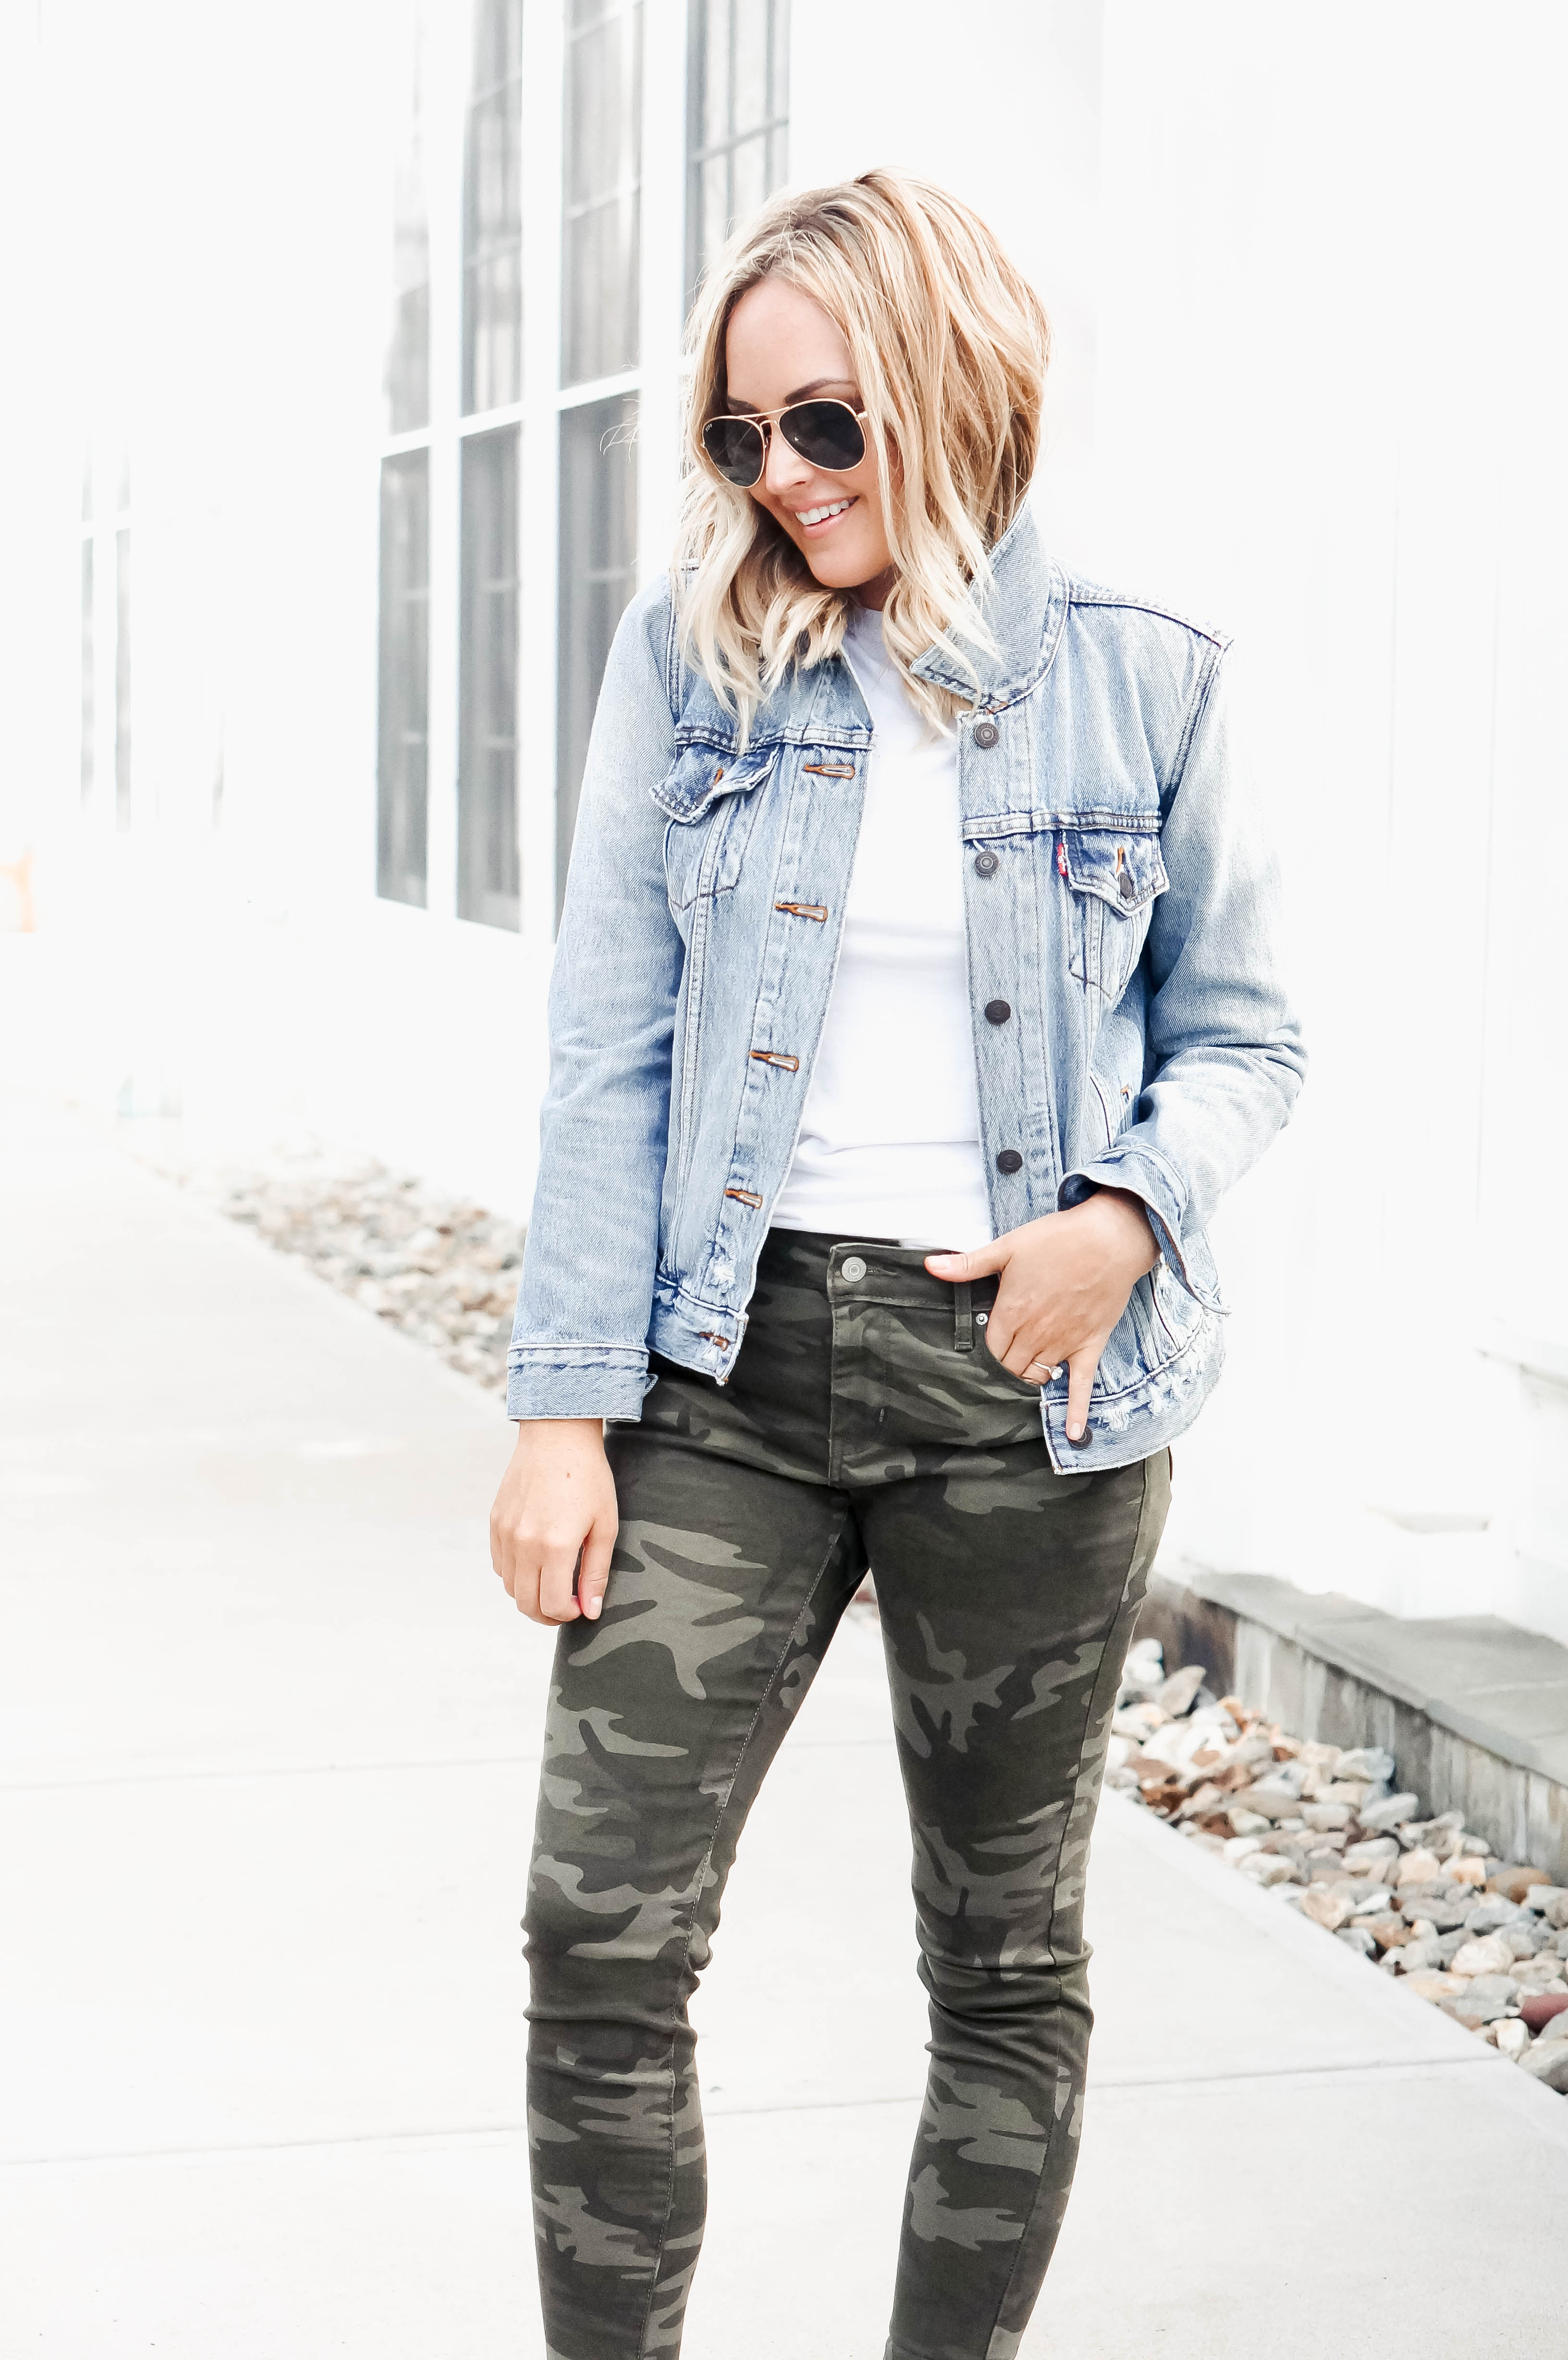 Everyday Trends For Fall With Levi's Camo